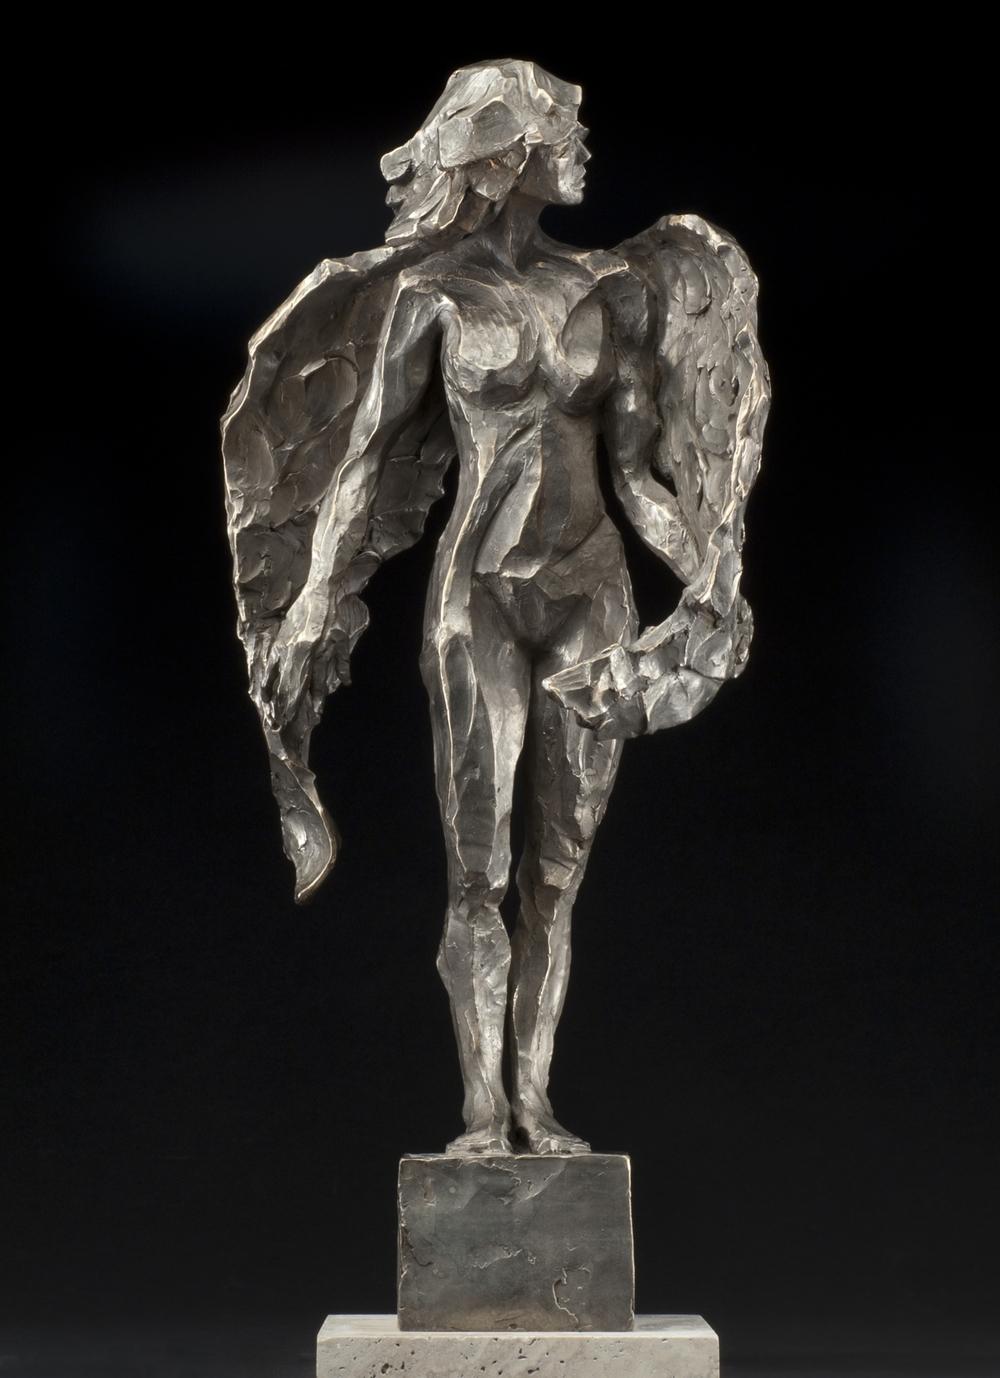 Gail Folwell Figurative Sculpture - Mountain Angel 7/9